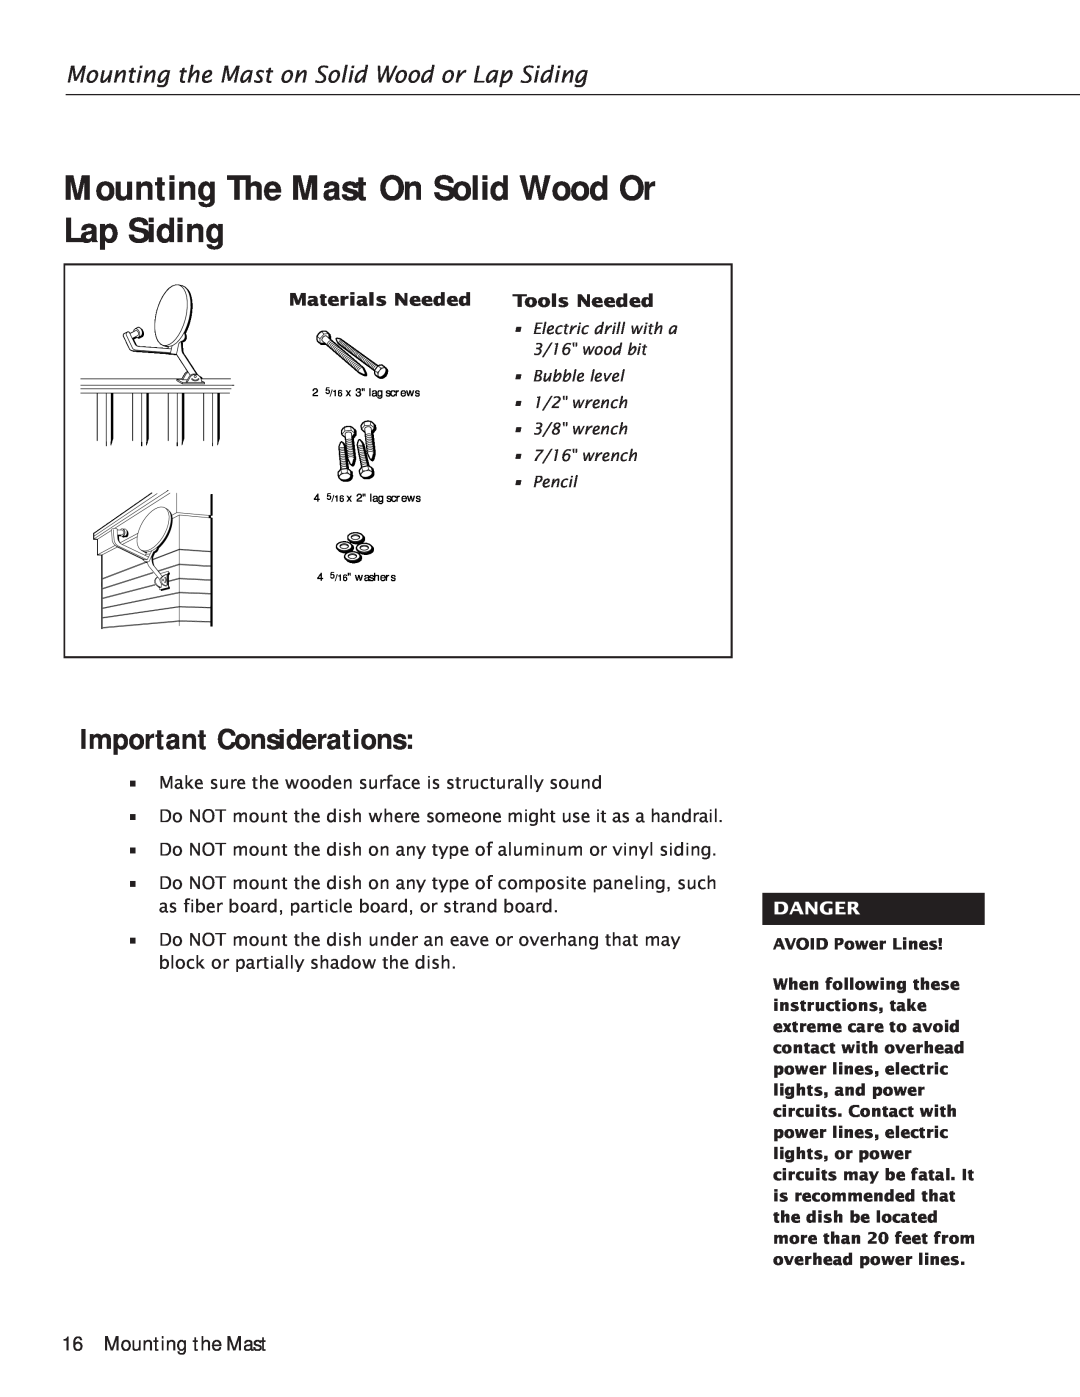 RCA Satellite TV Antenna manual Mounting The Mast On Solid Wood Or Lap Siding, Important Considerations, Mounting the Mast 